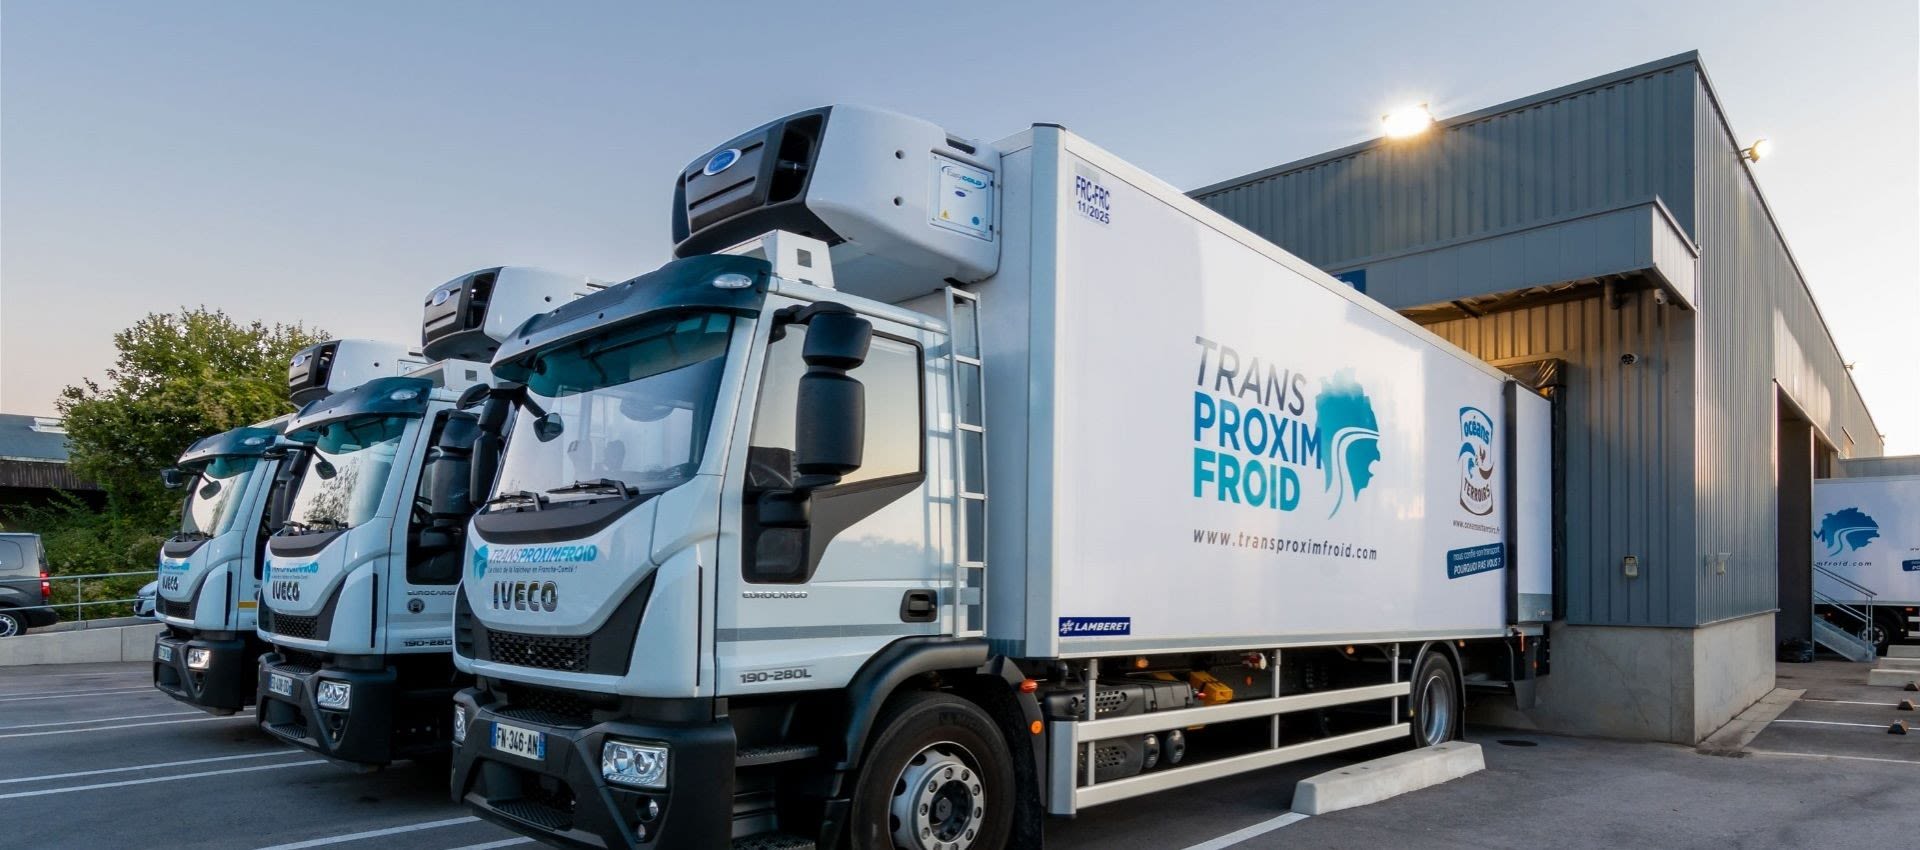 Trans Proxim Froid drastically reduces its road accidents by 80% thanks to Samsara's on-board cameras